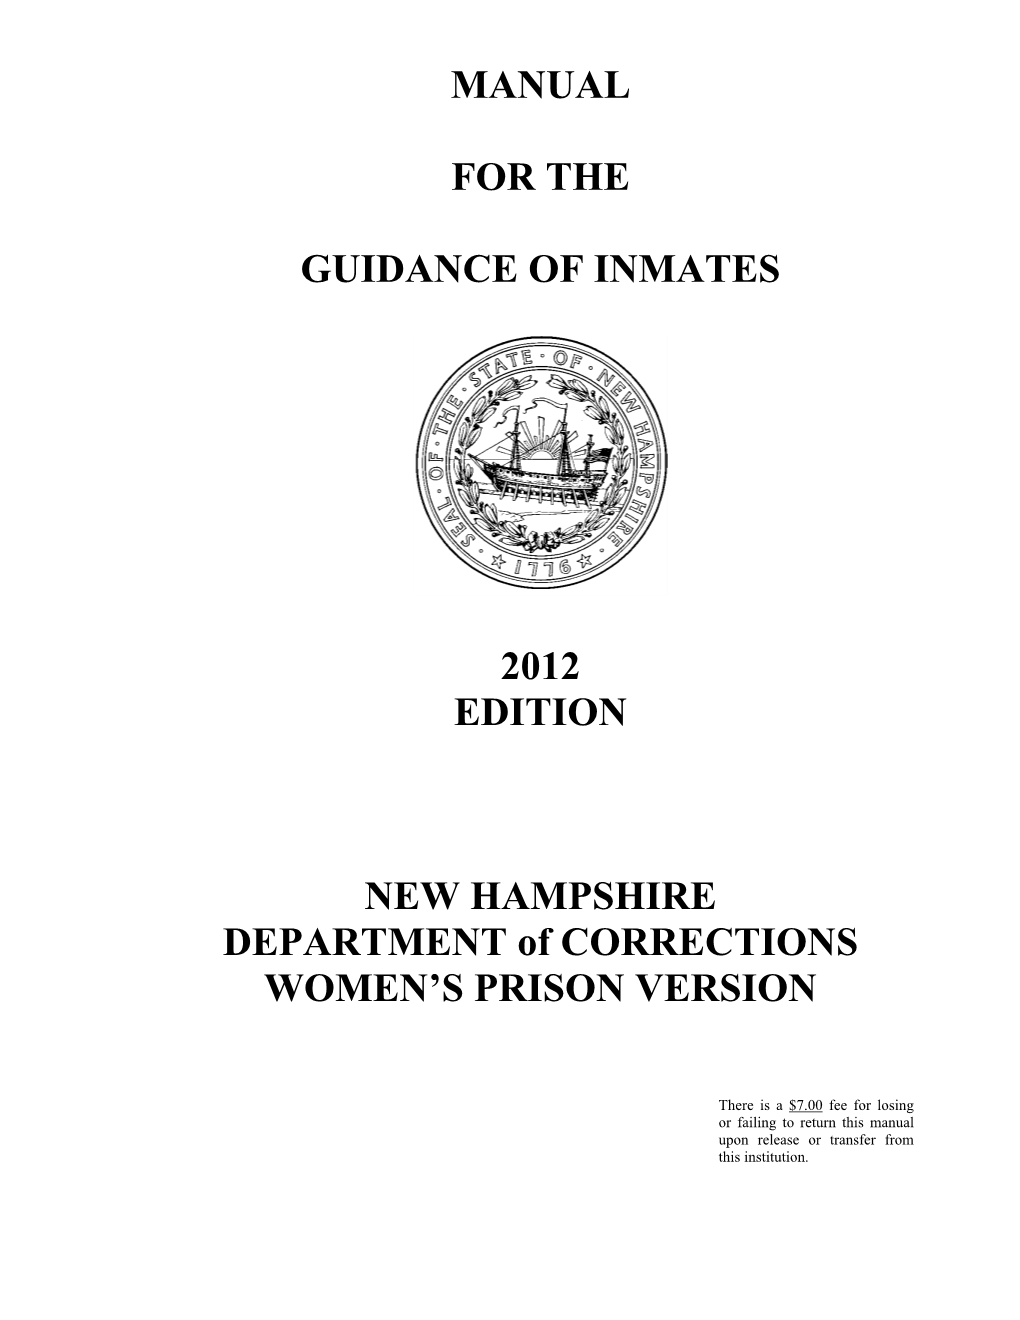 MANUAL for the GUIDANCE of INMATES 2012 EDITION NEW HAMPSHIRE DEPARTMENT of CORRECTIONS WOMEN's PRISON VERSION